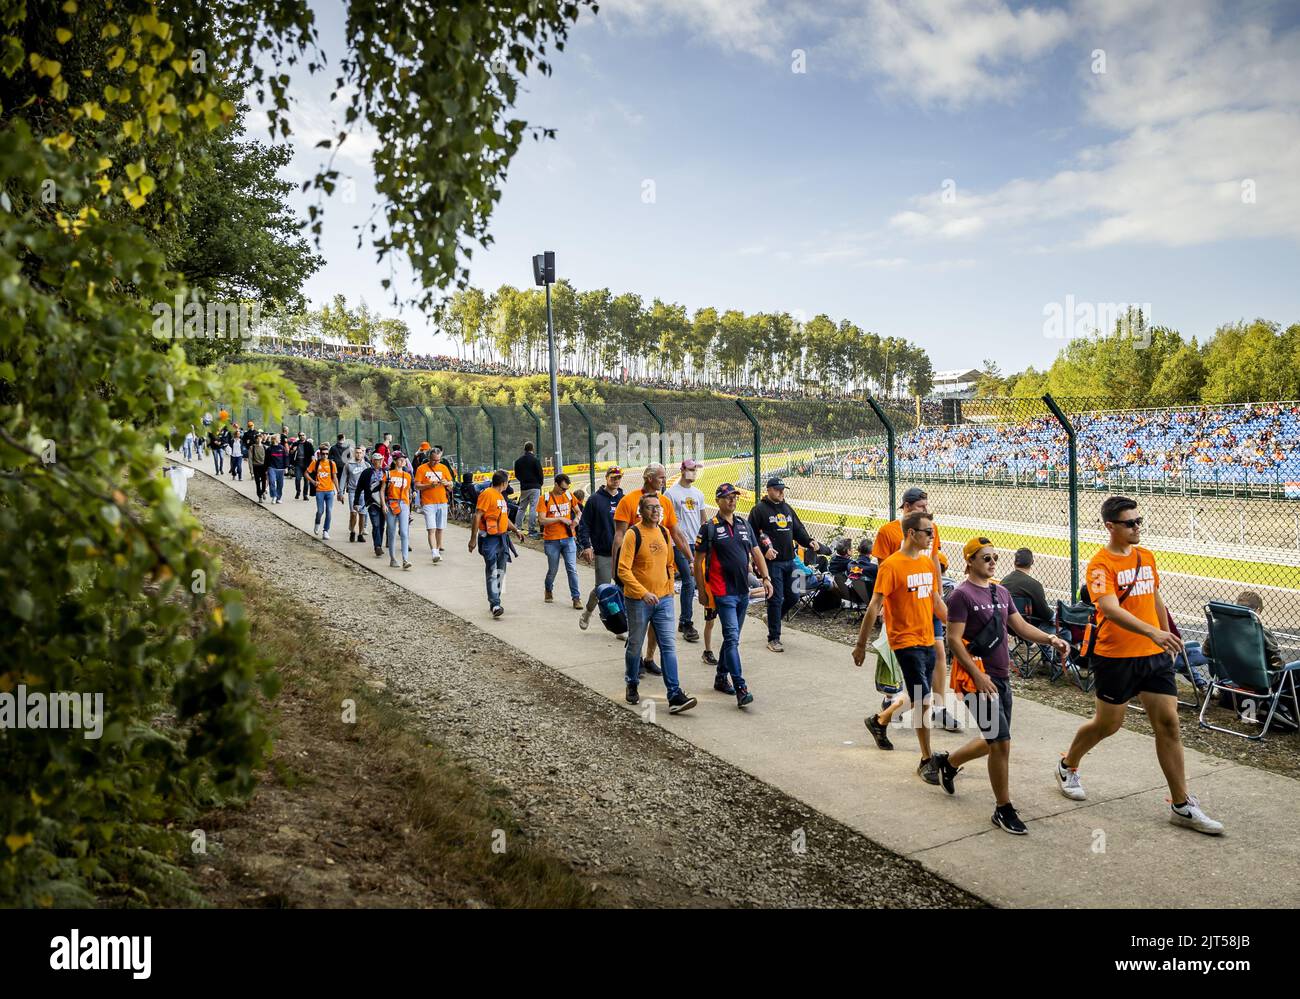 SPA - Fans of Max Verstappen walk on the track leading up to the F1 Grand Prix of Belgium at the Spa-Francorchamps circuit on August 29, 2022 in Spa, Belgium. REMKO DE WAAL Stock Photo